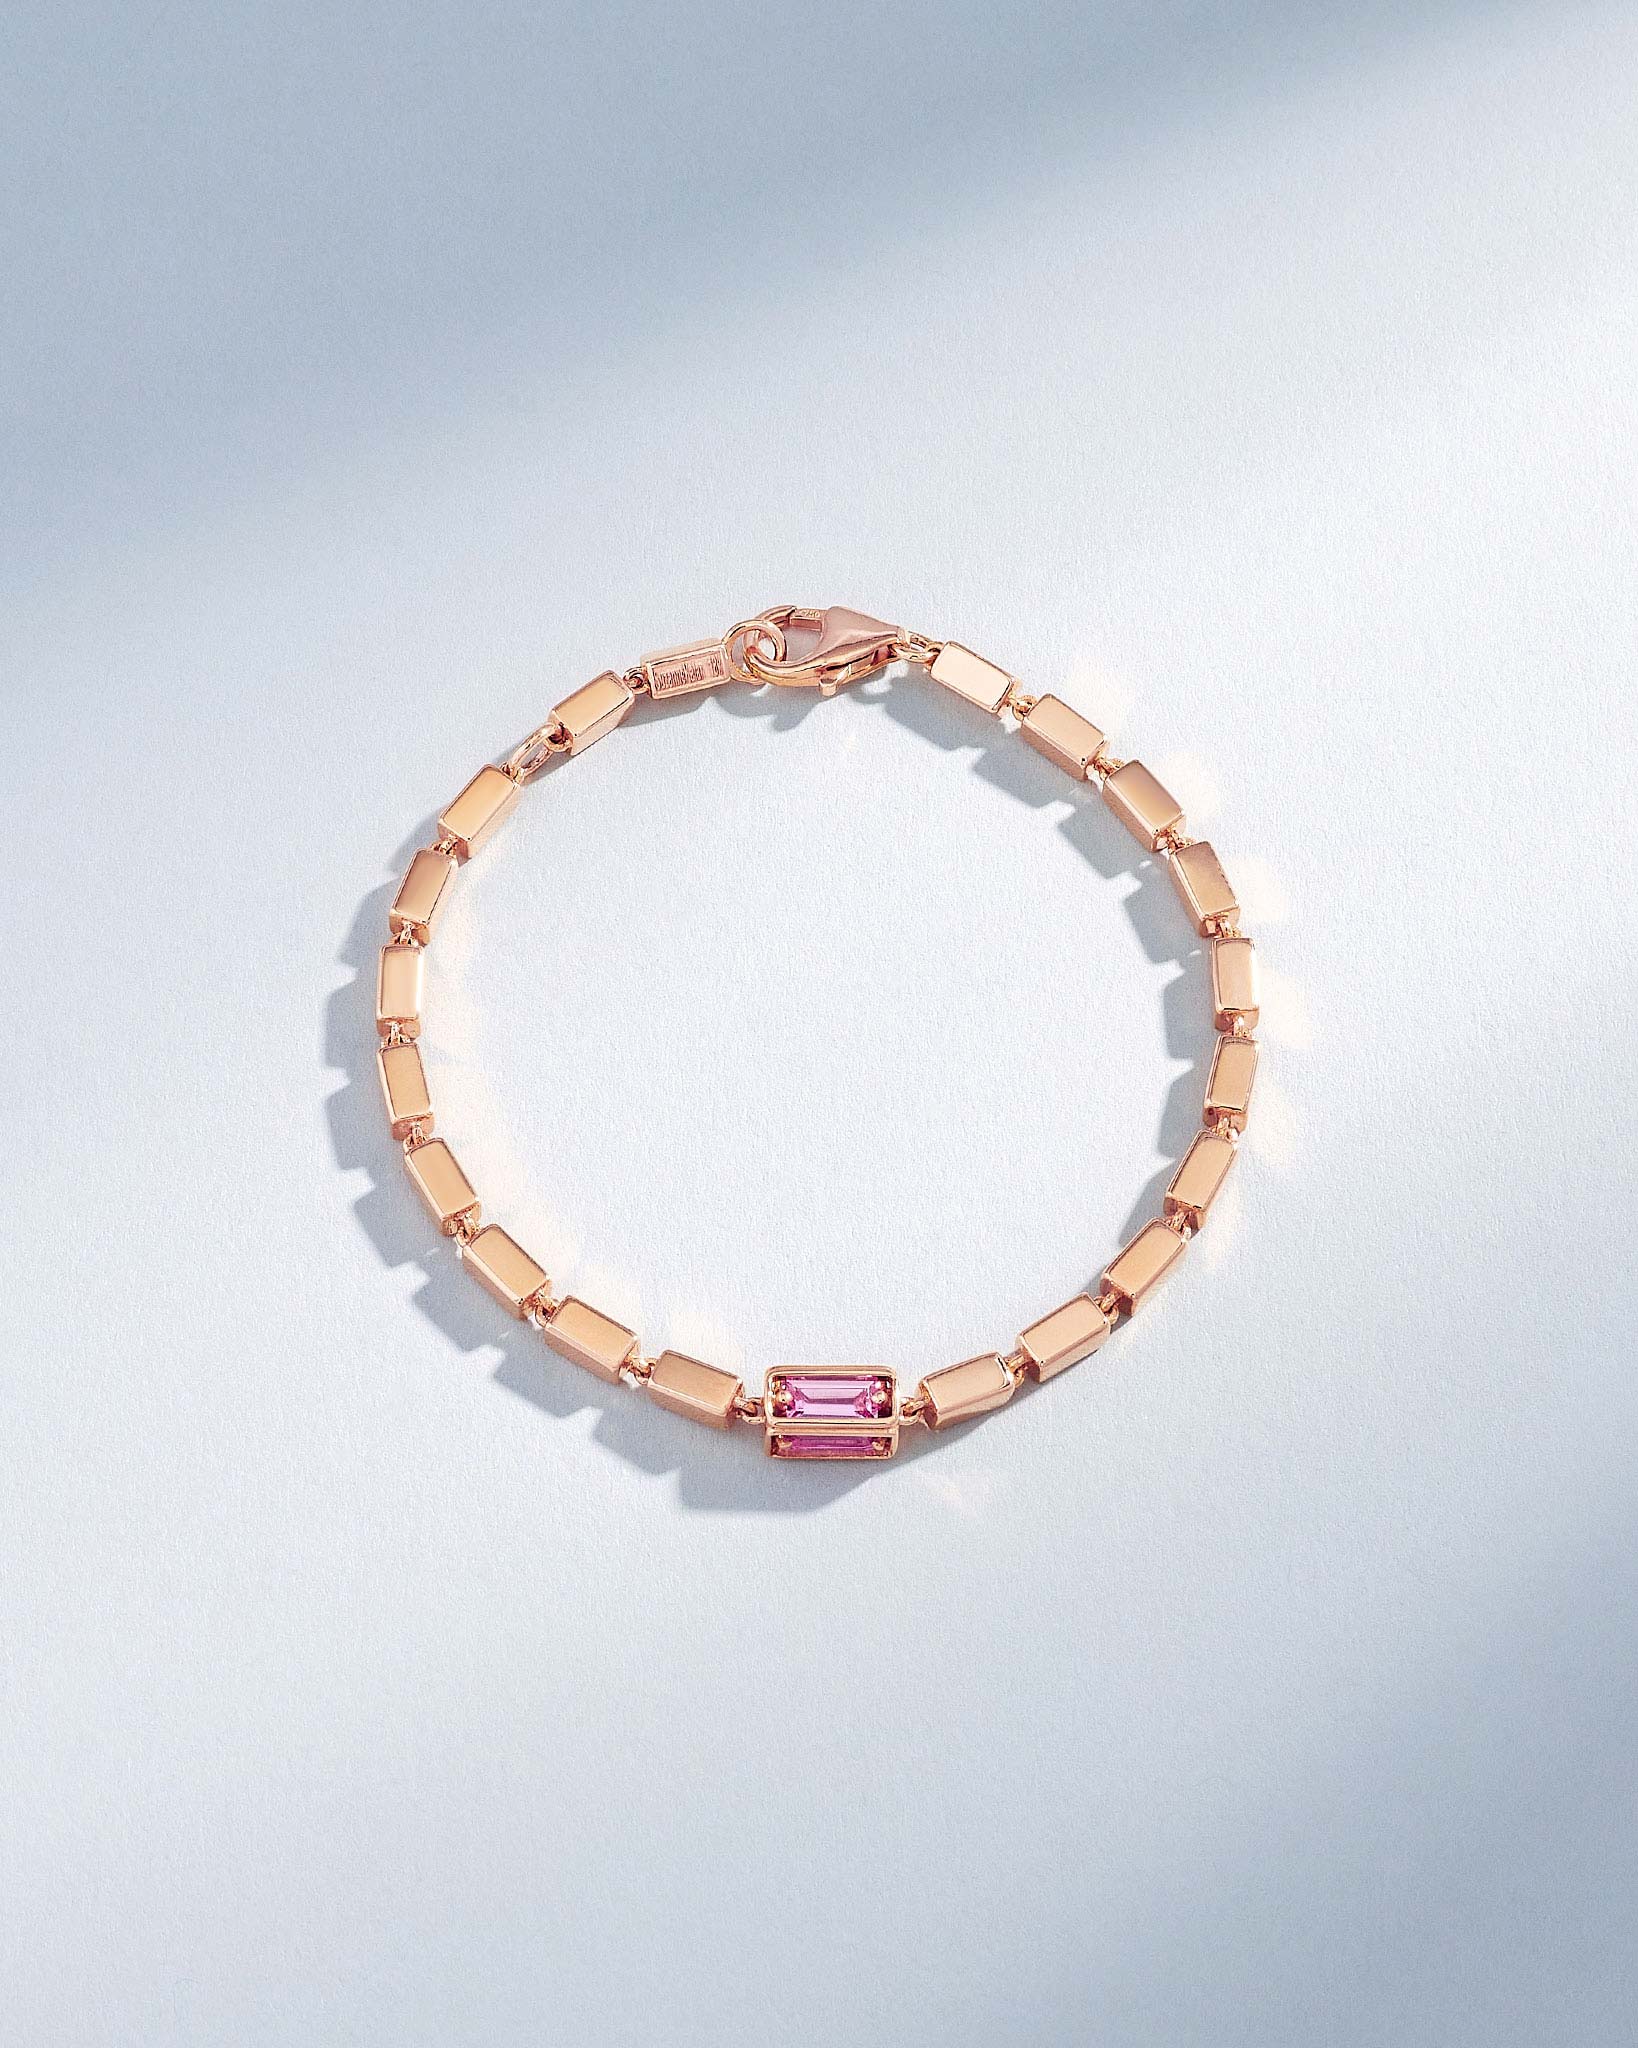 Suzanne Kalan Block-Chain Single Pink Sapphire Thick Bracelet in 18k rose gold